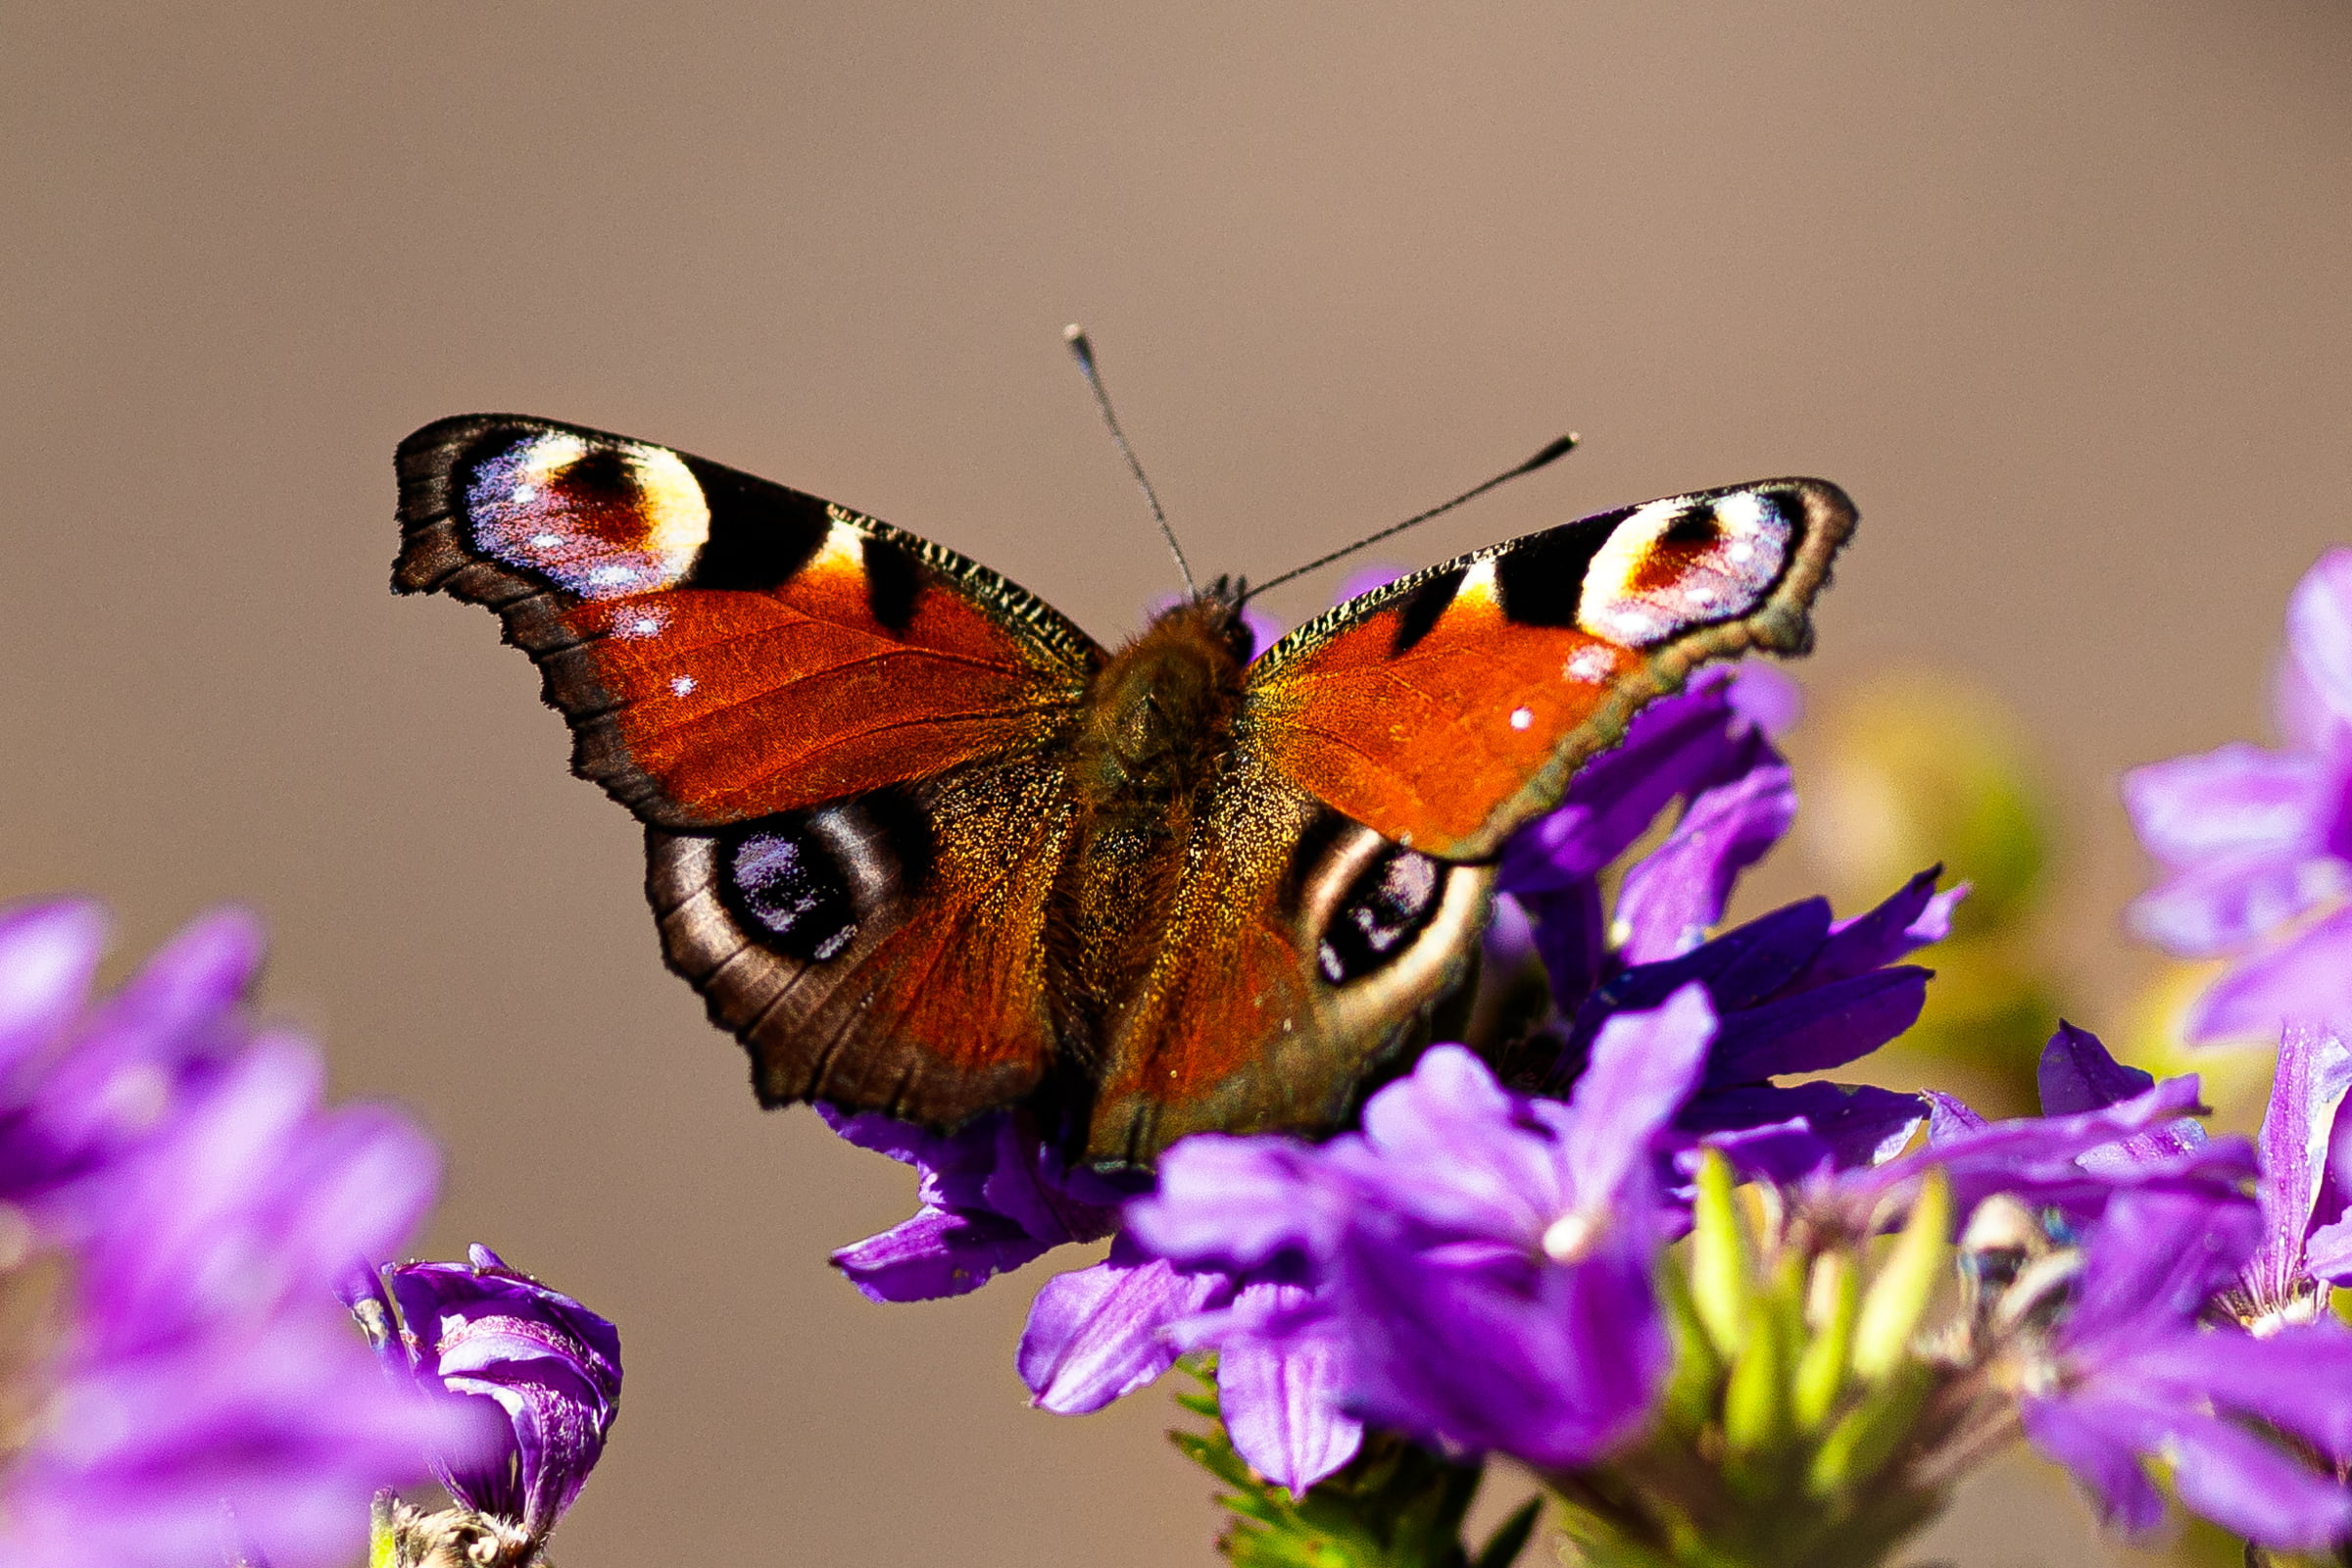 A close-up of a butterfly sitting on a purple flower, showing it's orange wings with markings that are reminiscent of a pair of eyes.